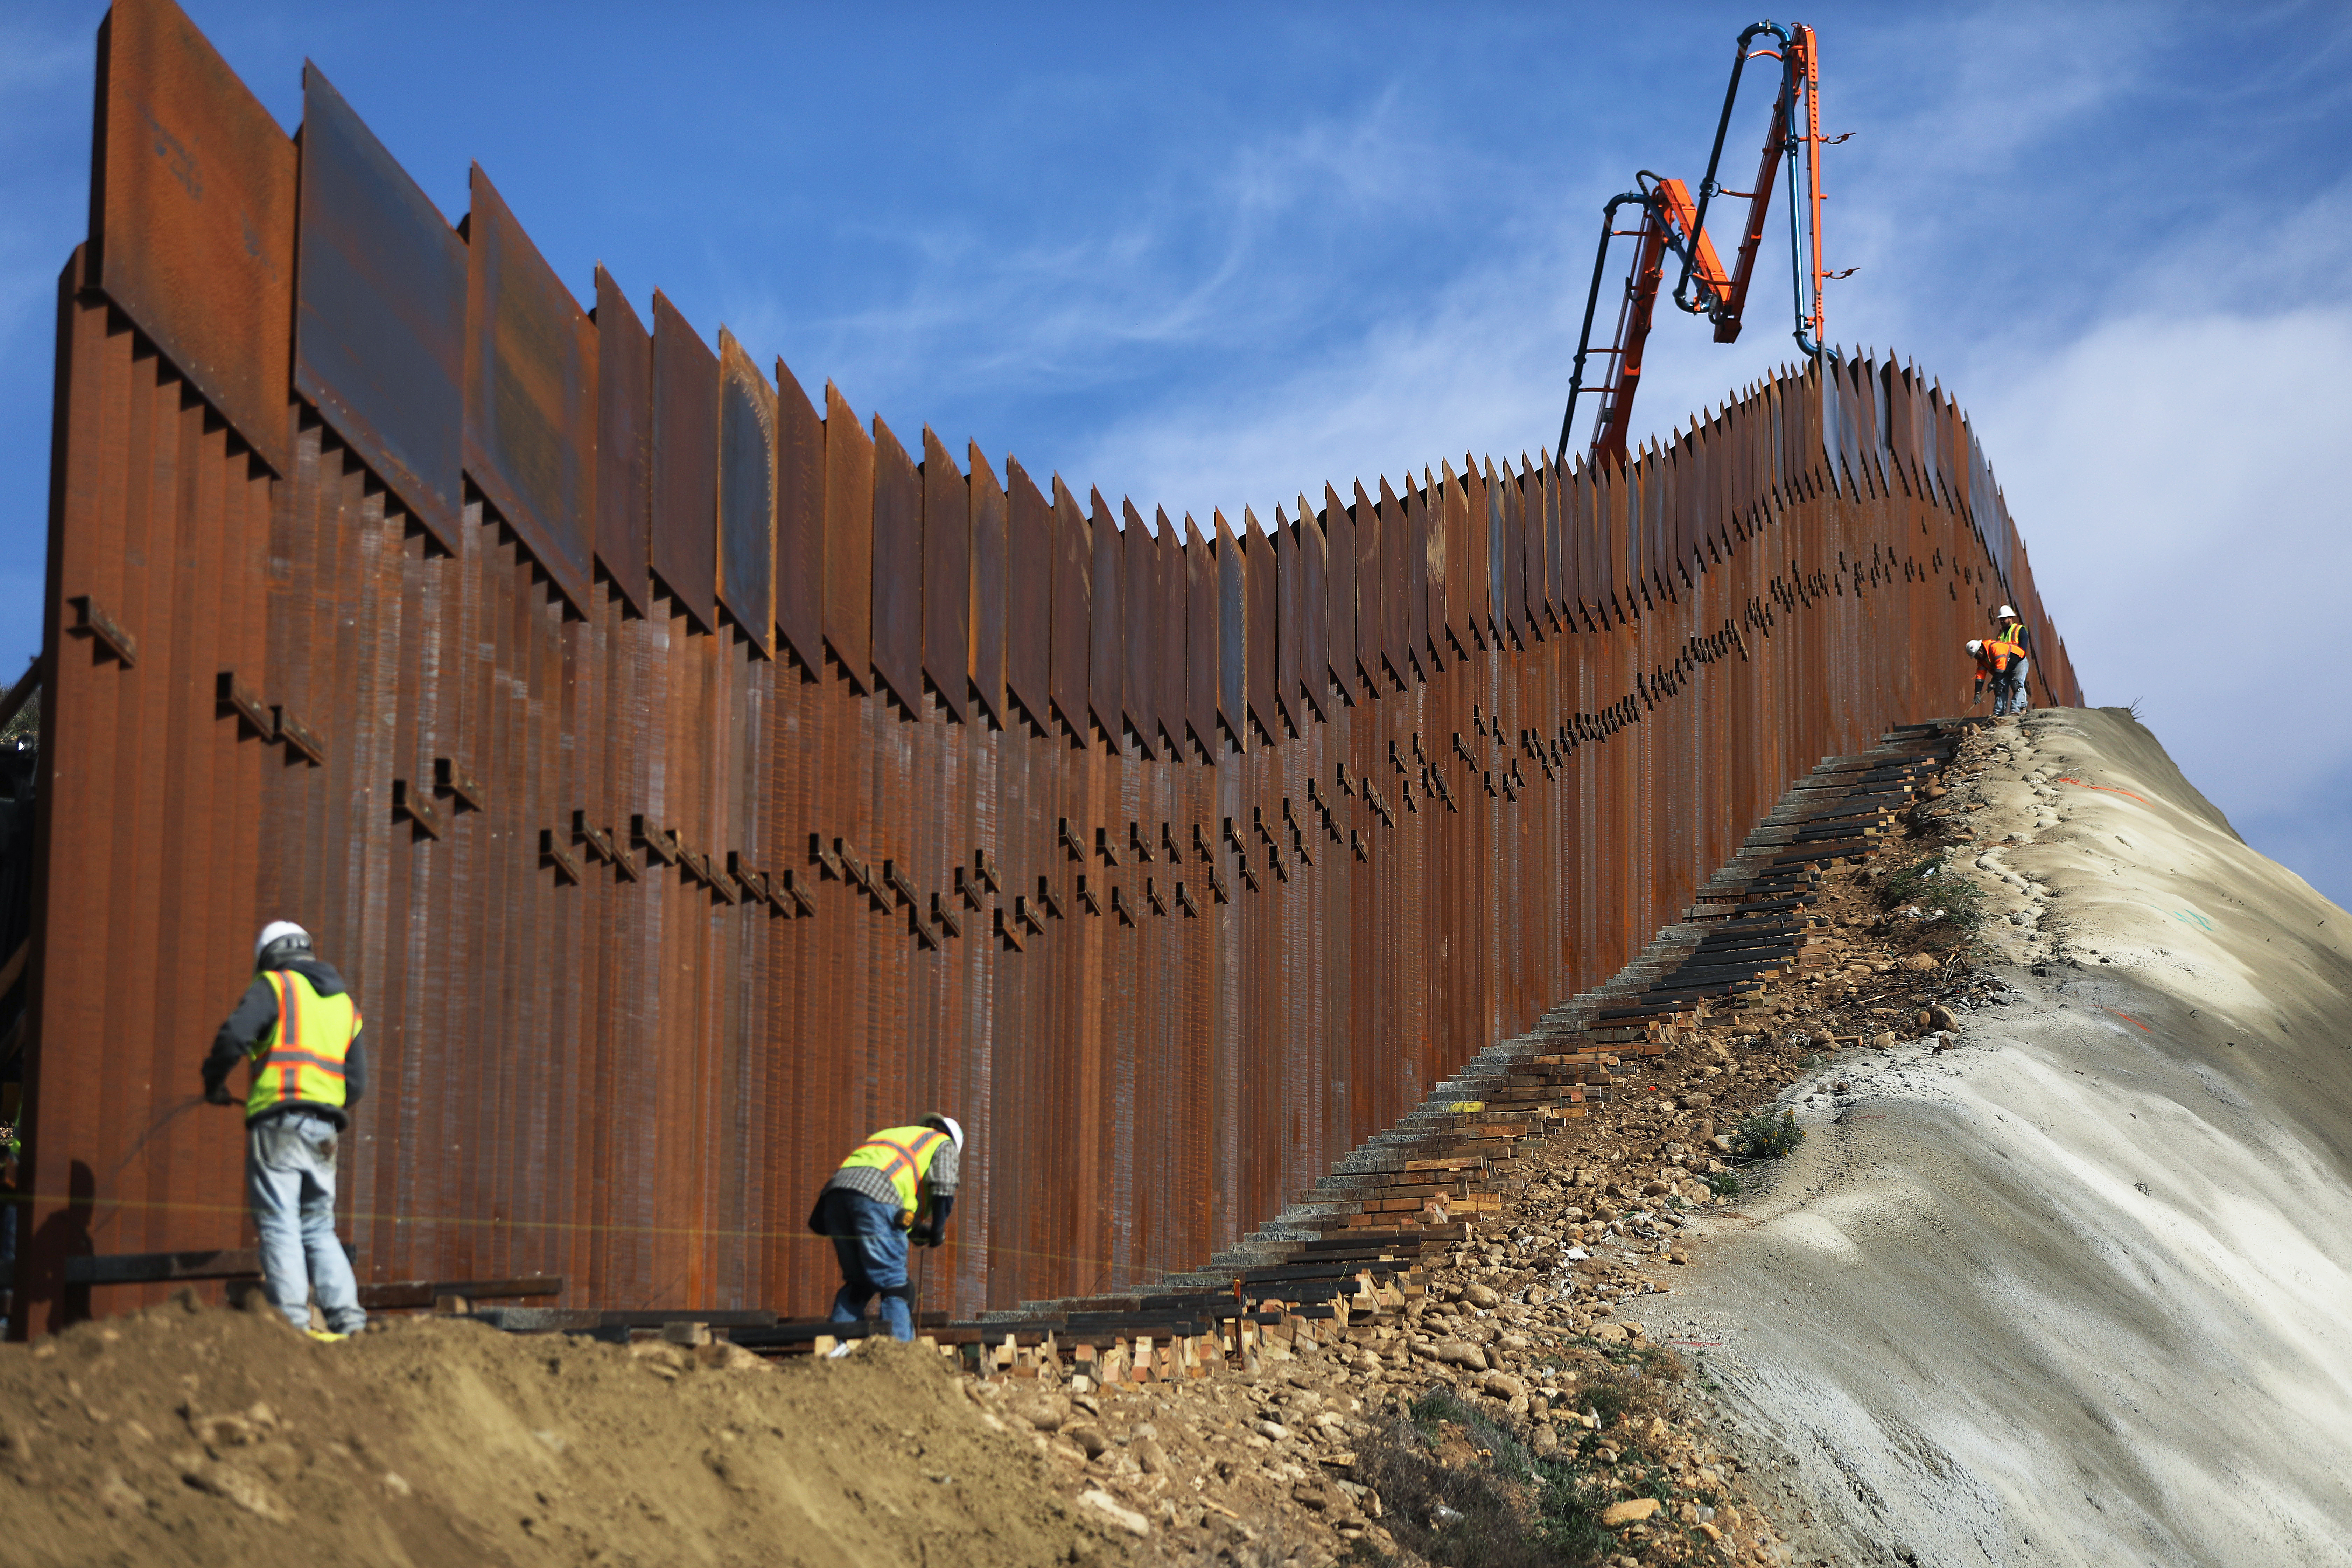 A construction crew works as new sections of the U.S.-Mexico border barrier are installed on January 11, 2019. (Mario Tama/Getty Images)